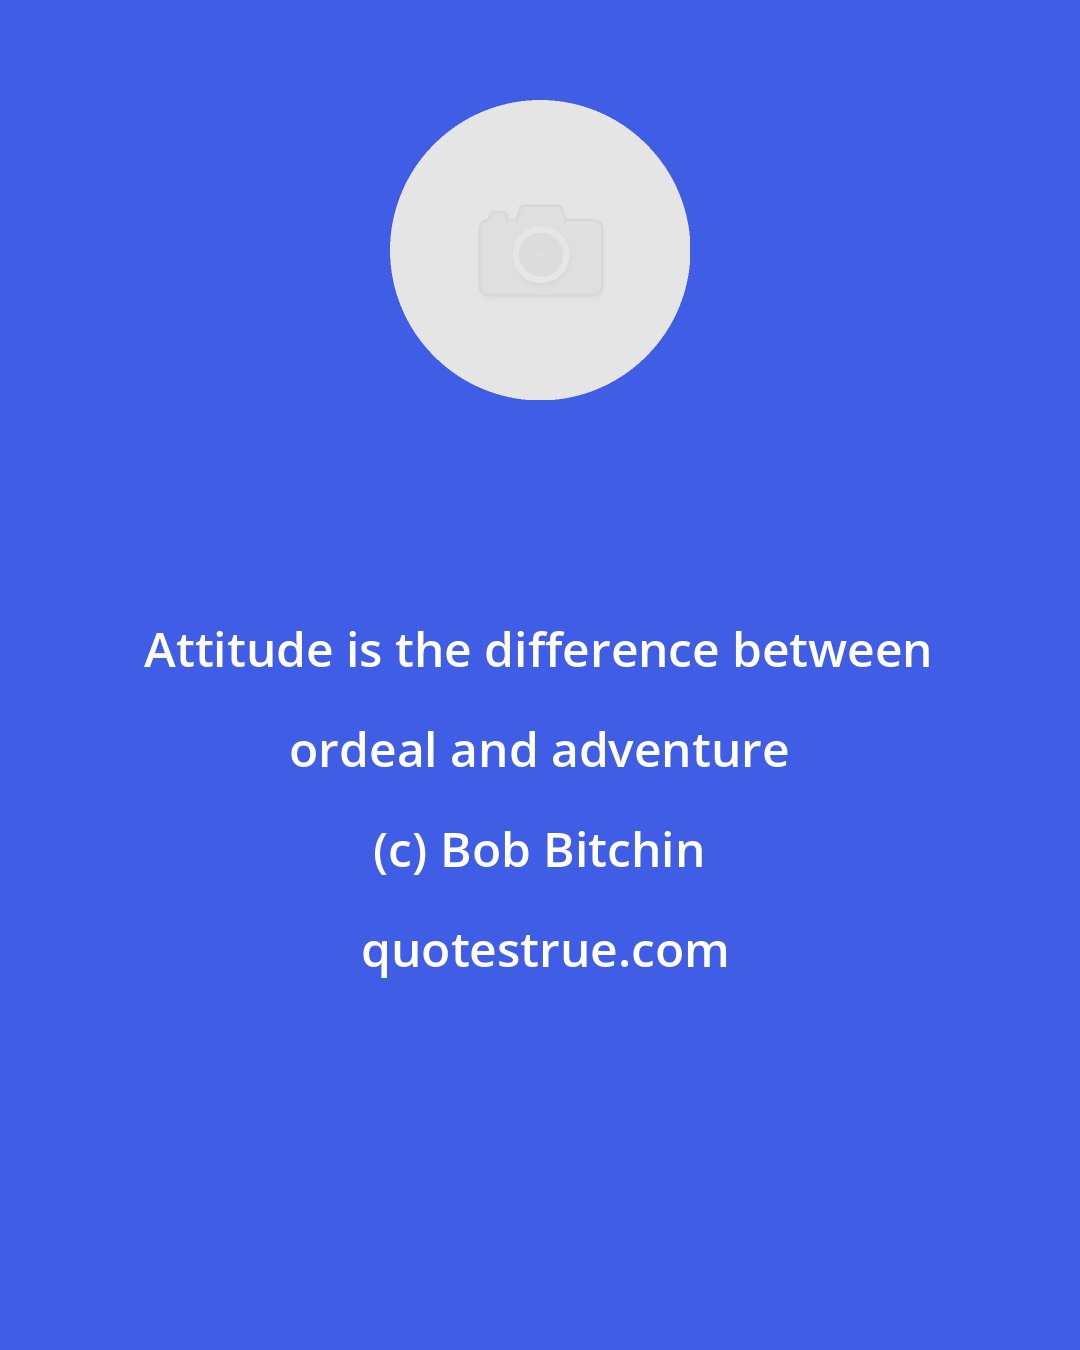 Bob Bitchin: Attitude is the difference between ordeal and adventure